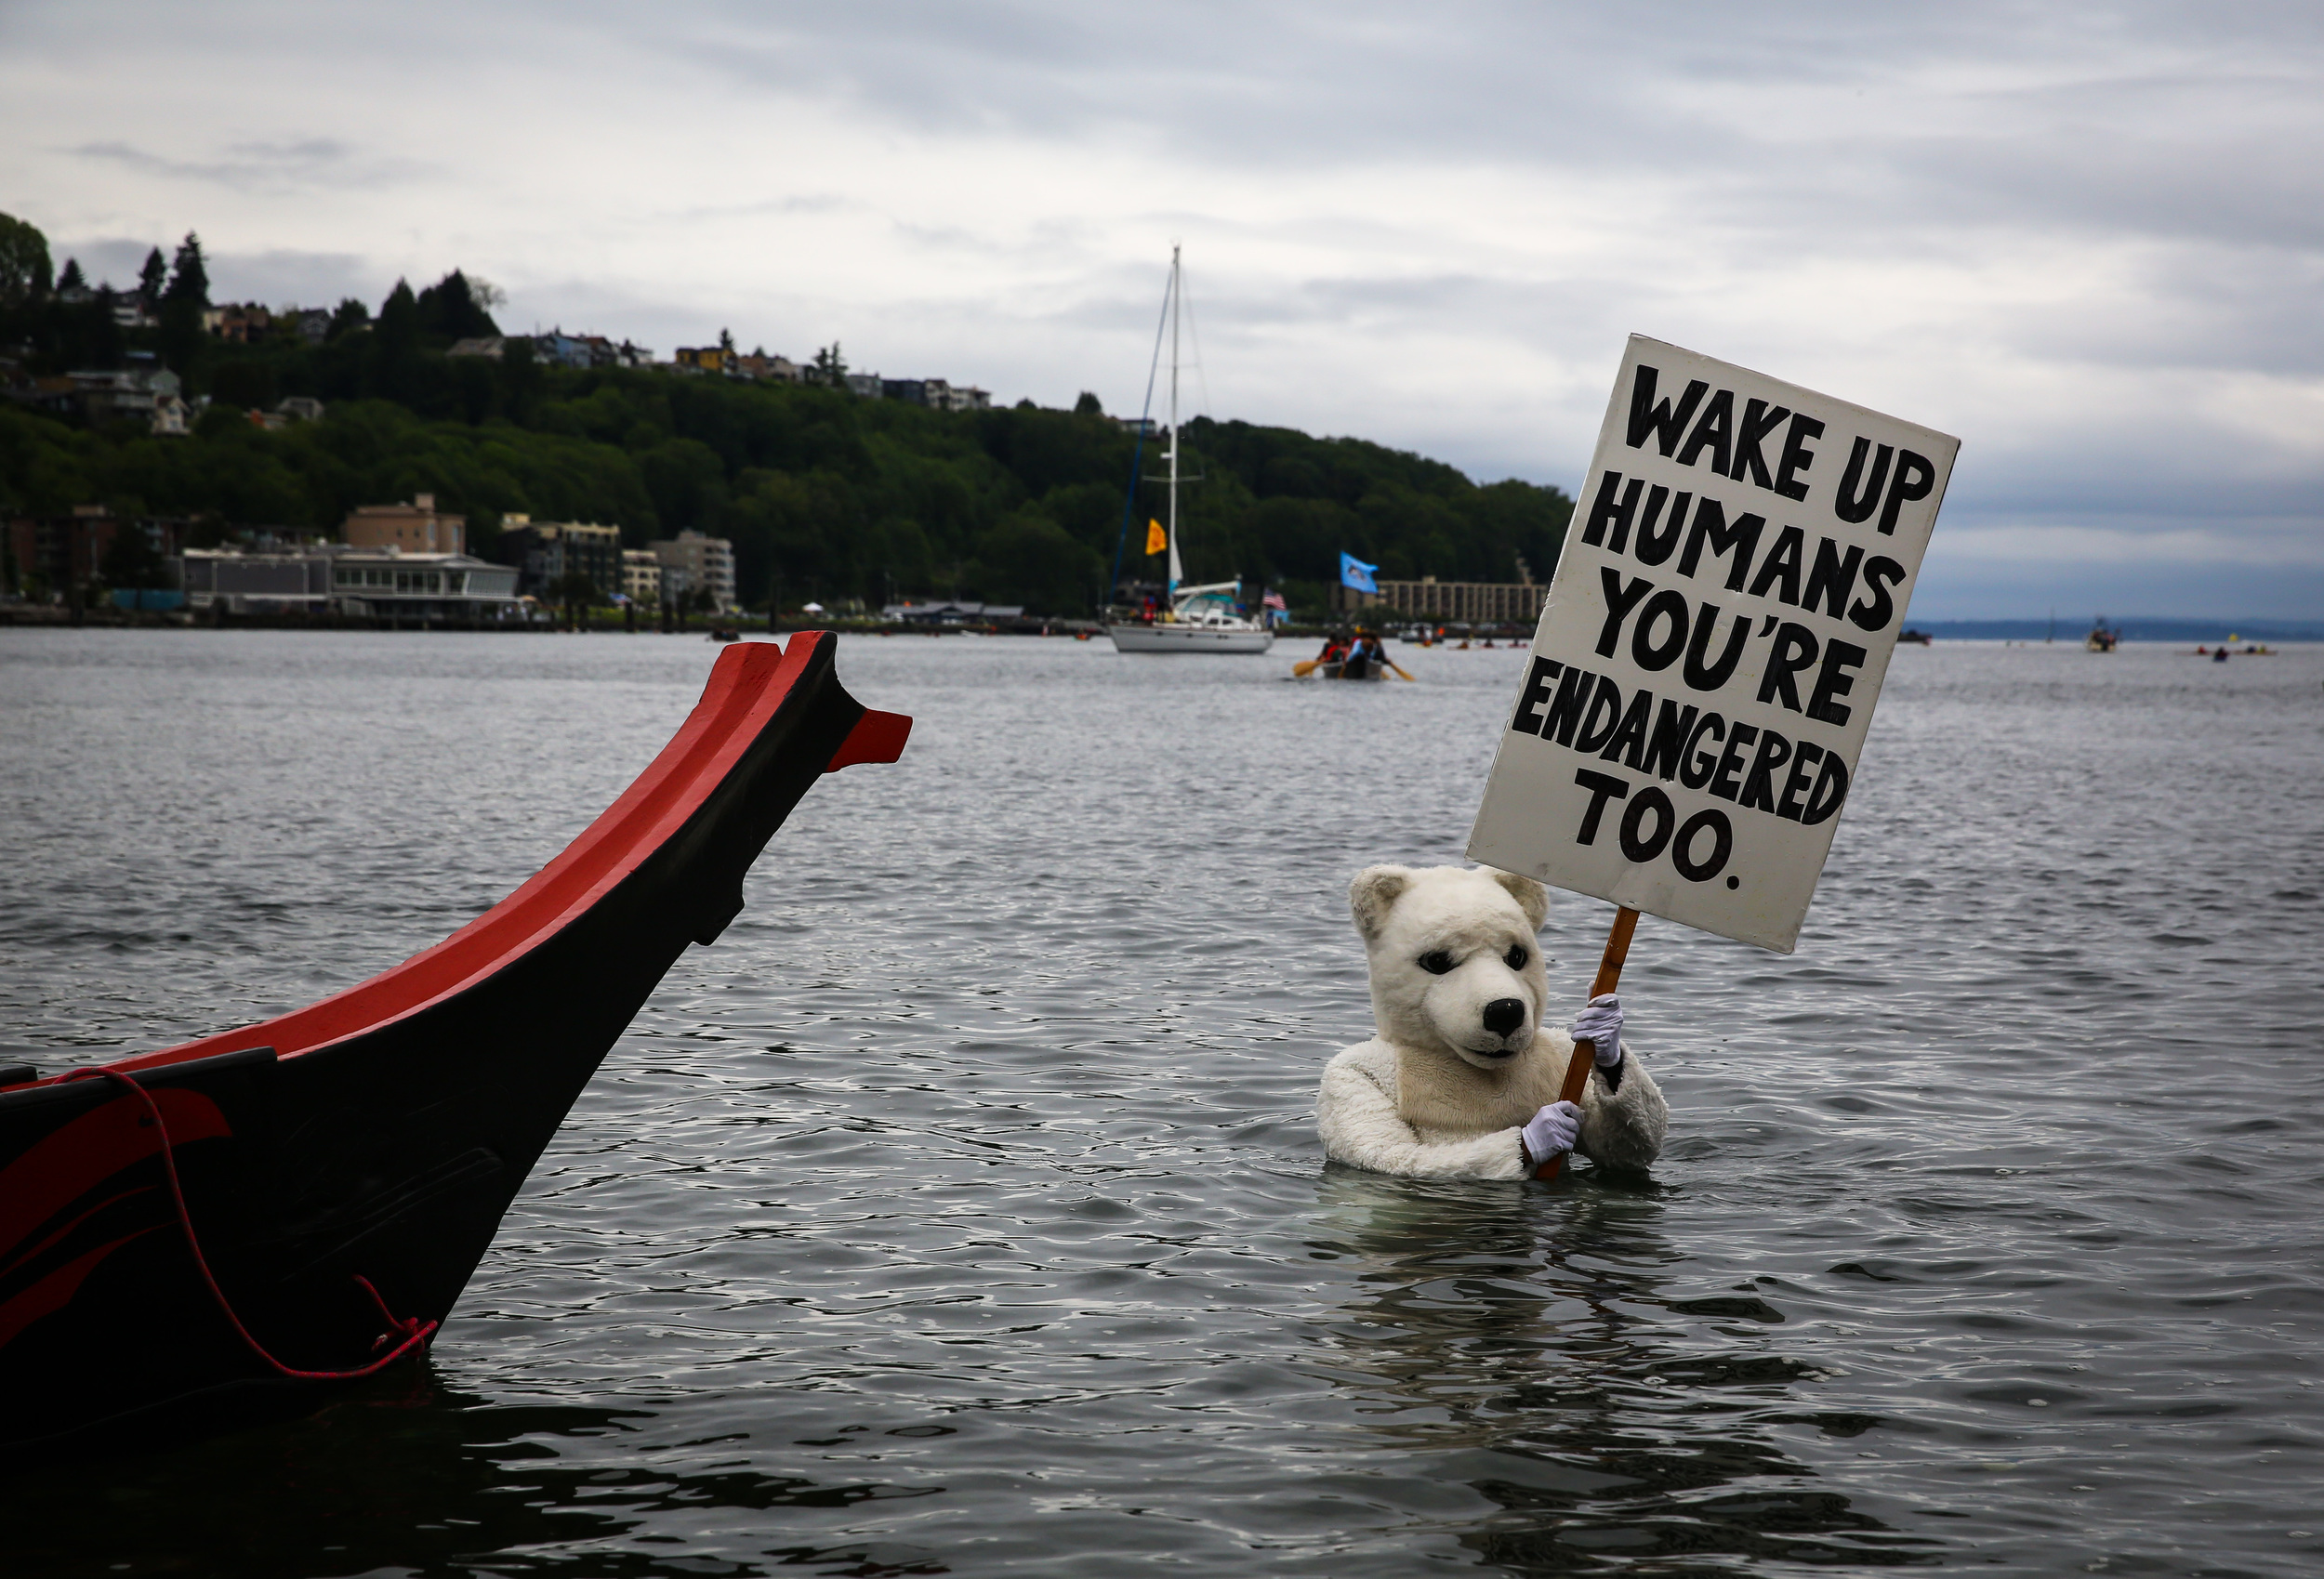   A person in a polar bear costume wades through the water during a protest against drilling in the Arctic and the Port of Seattle being used as a port for the Shell Oil drilling rig Polar Pioneer. The protest flotilla drew many paddlers to show thei